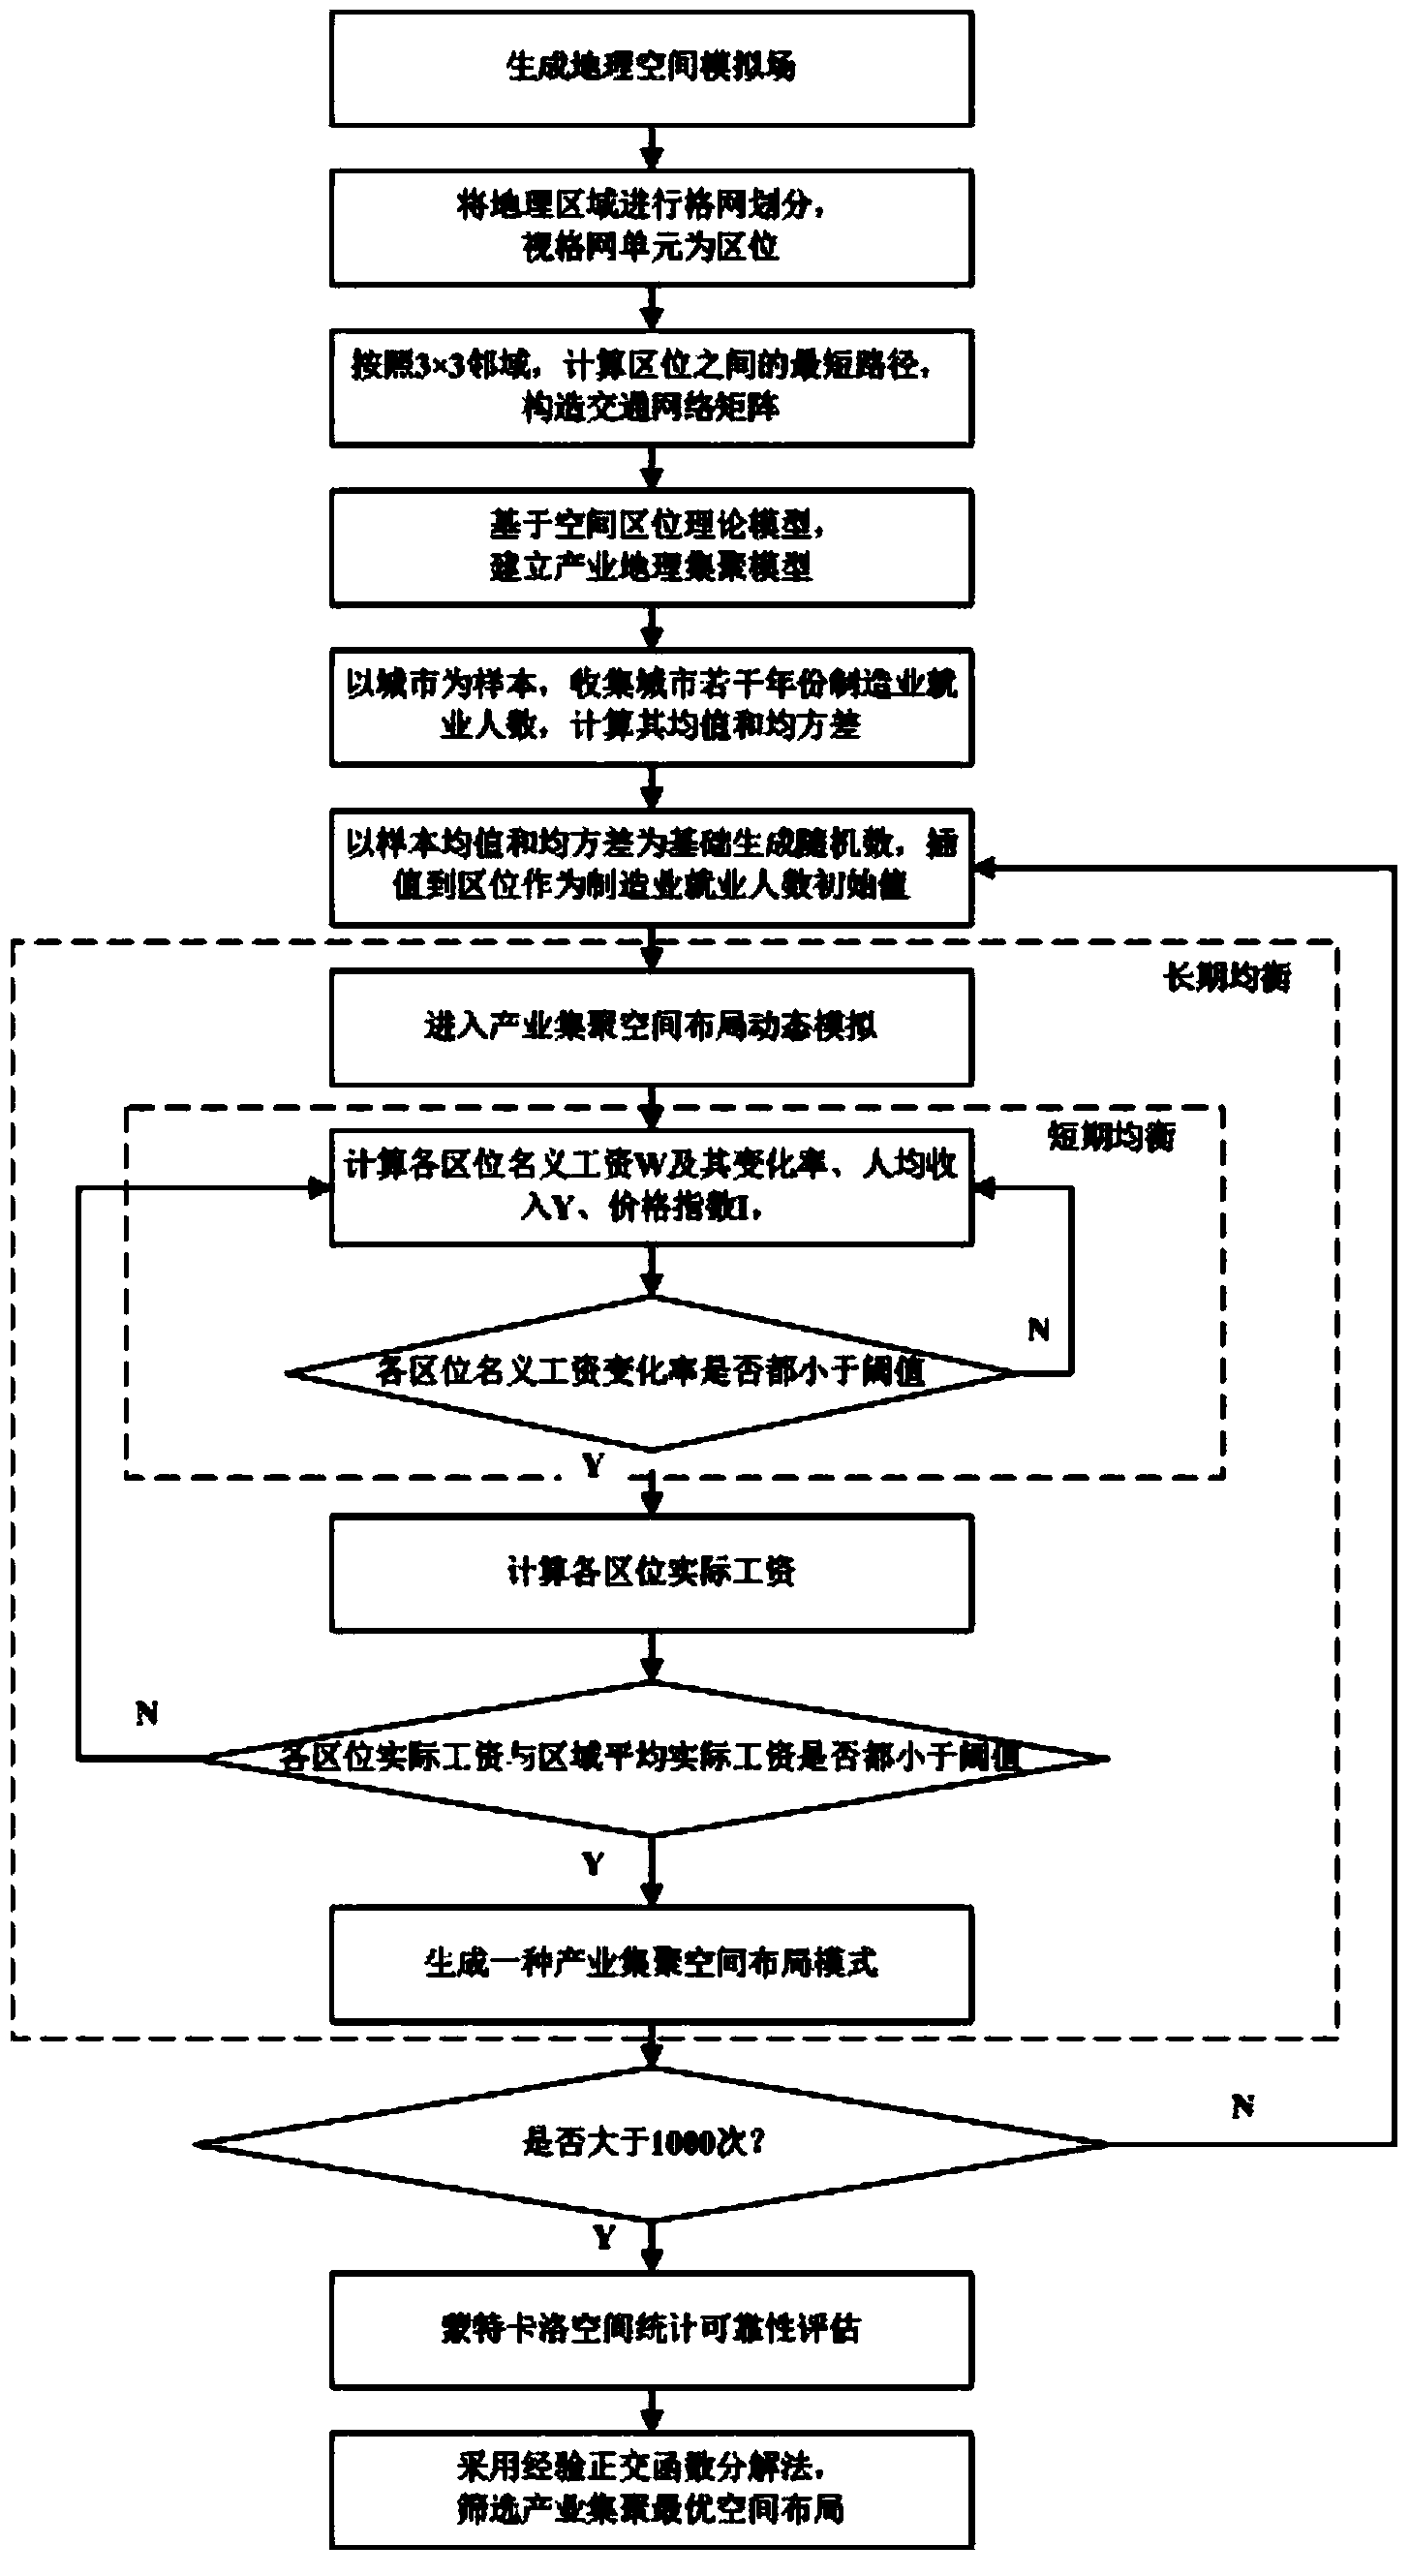 Industry cluster space layout simulation, optimization and screening method